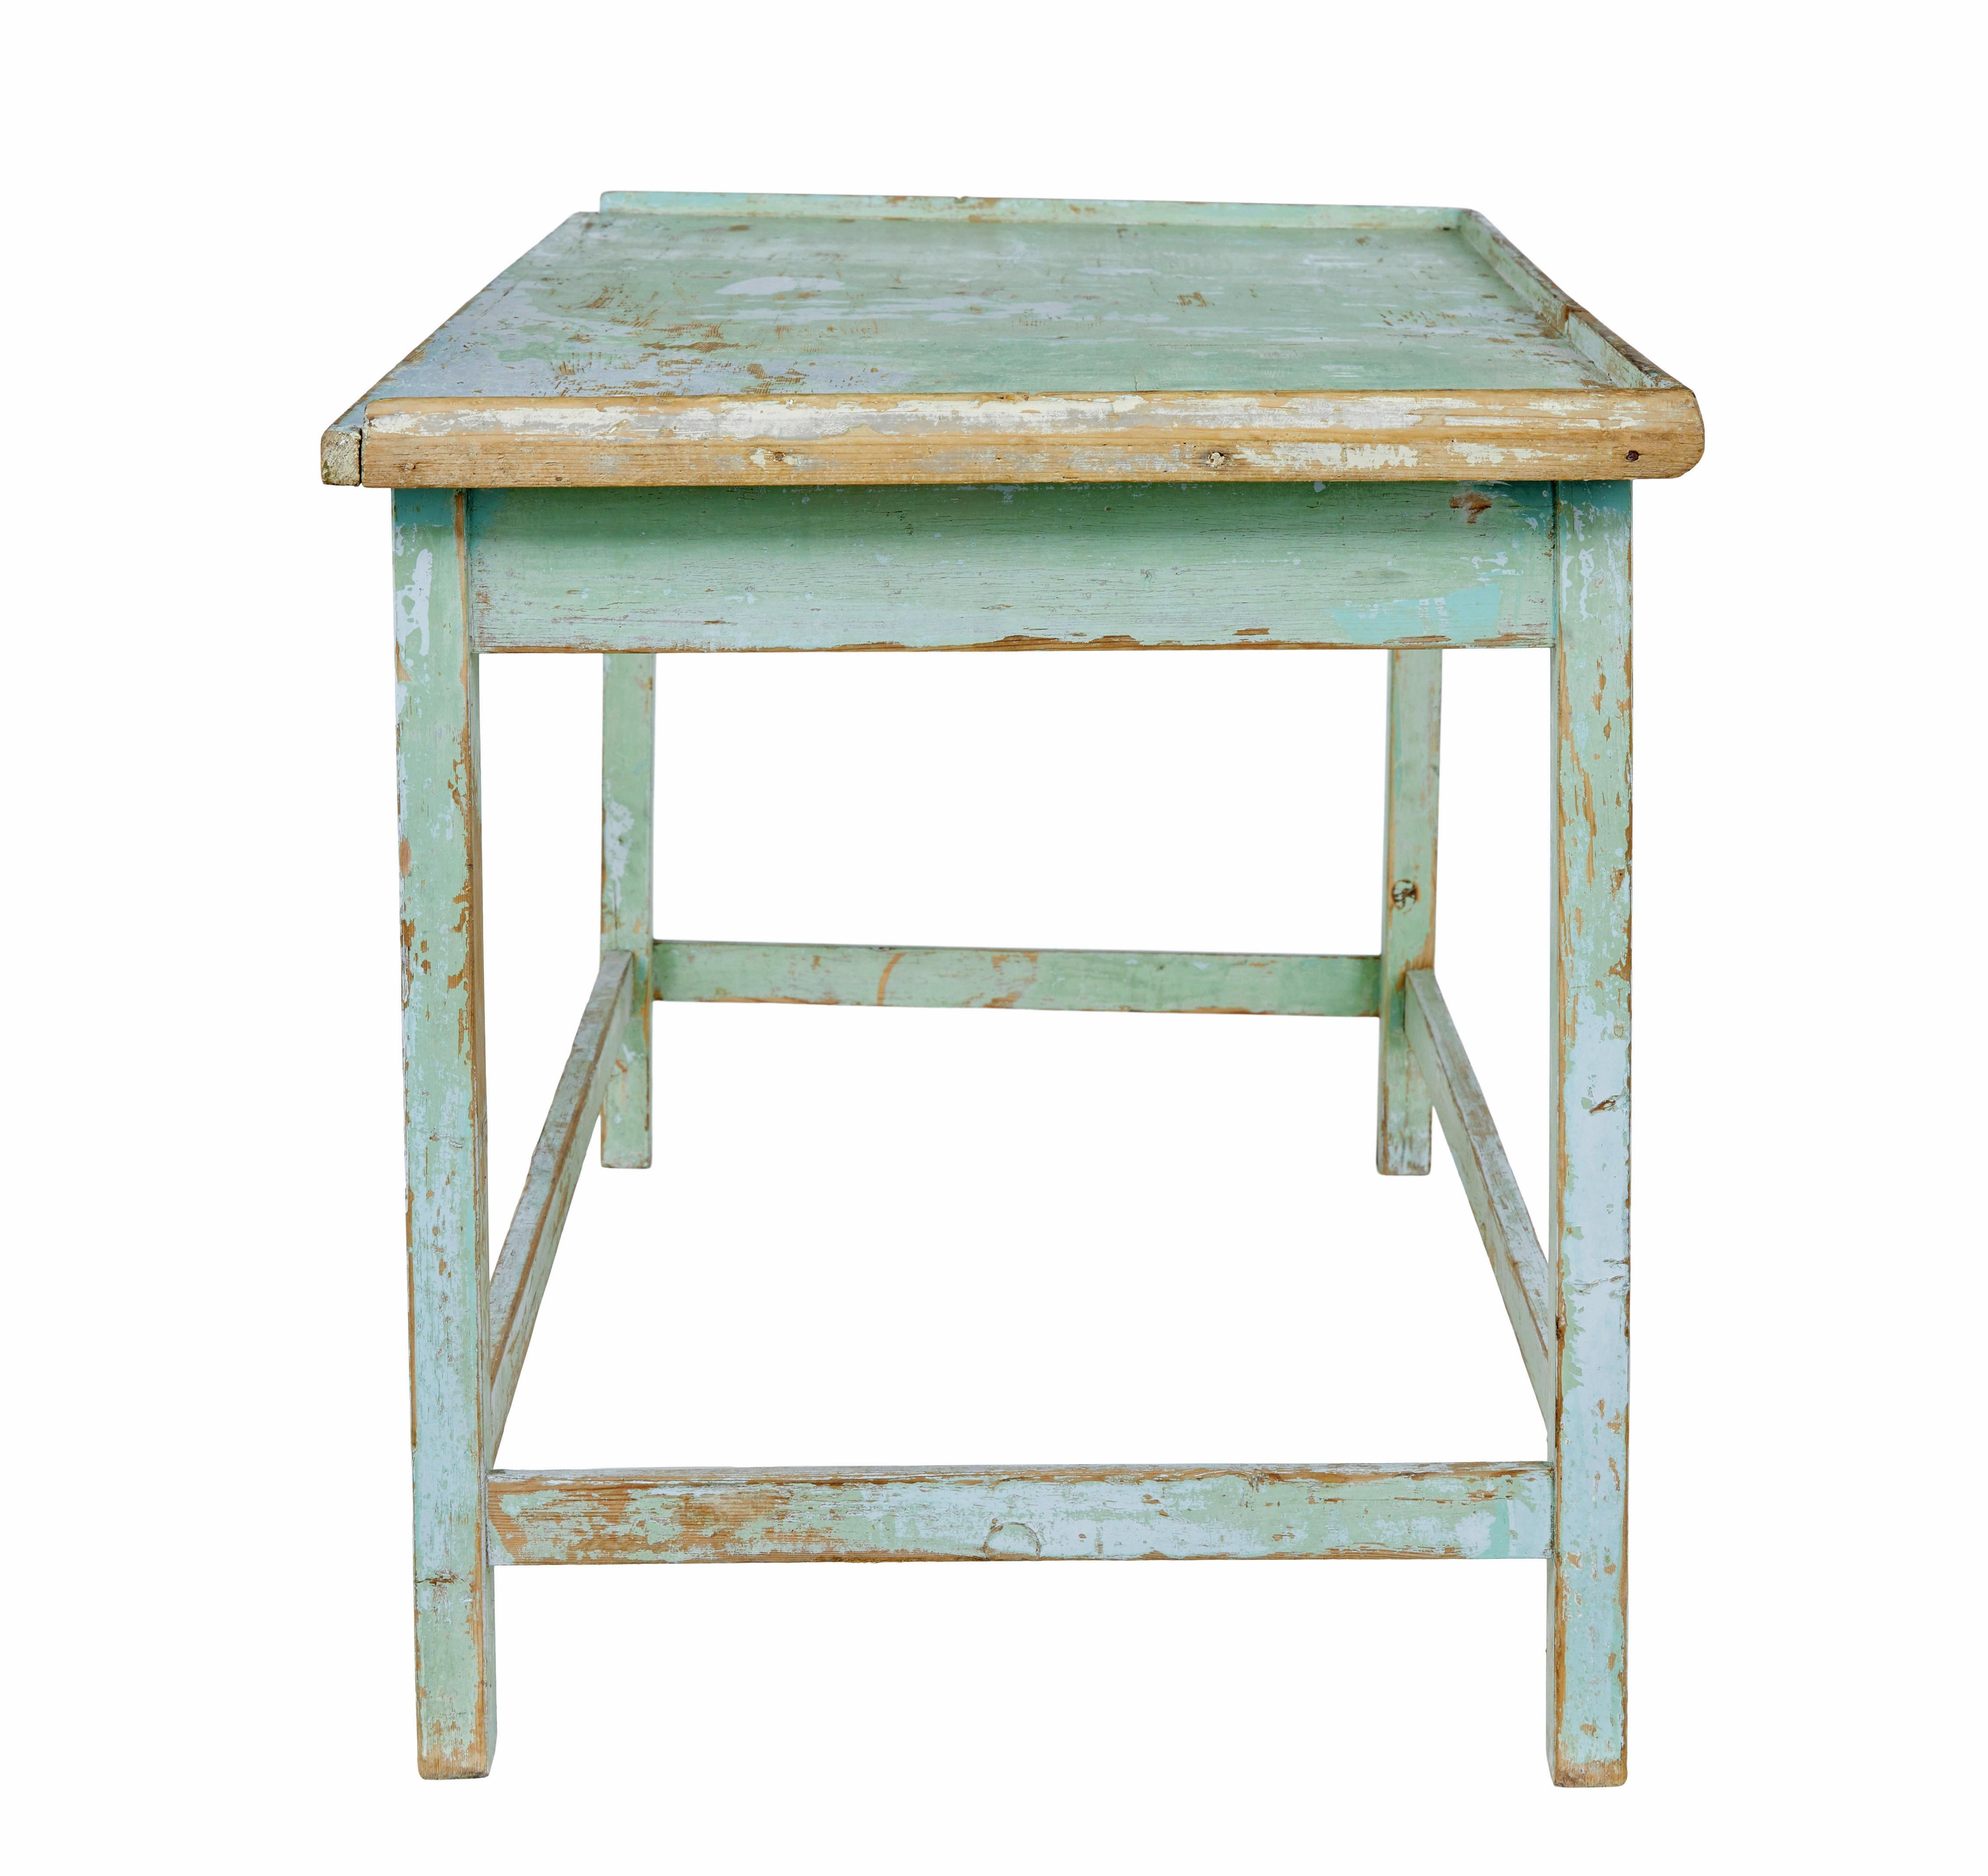 Rustic Swedish 19th century painted baking table For Sale